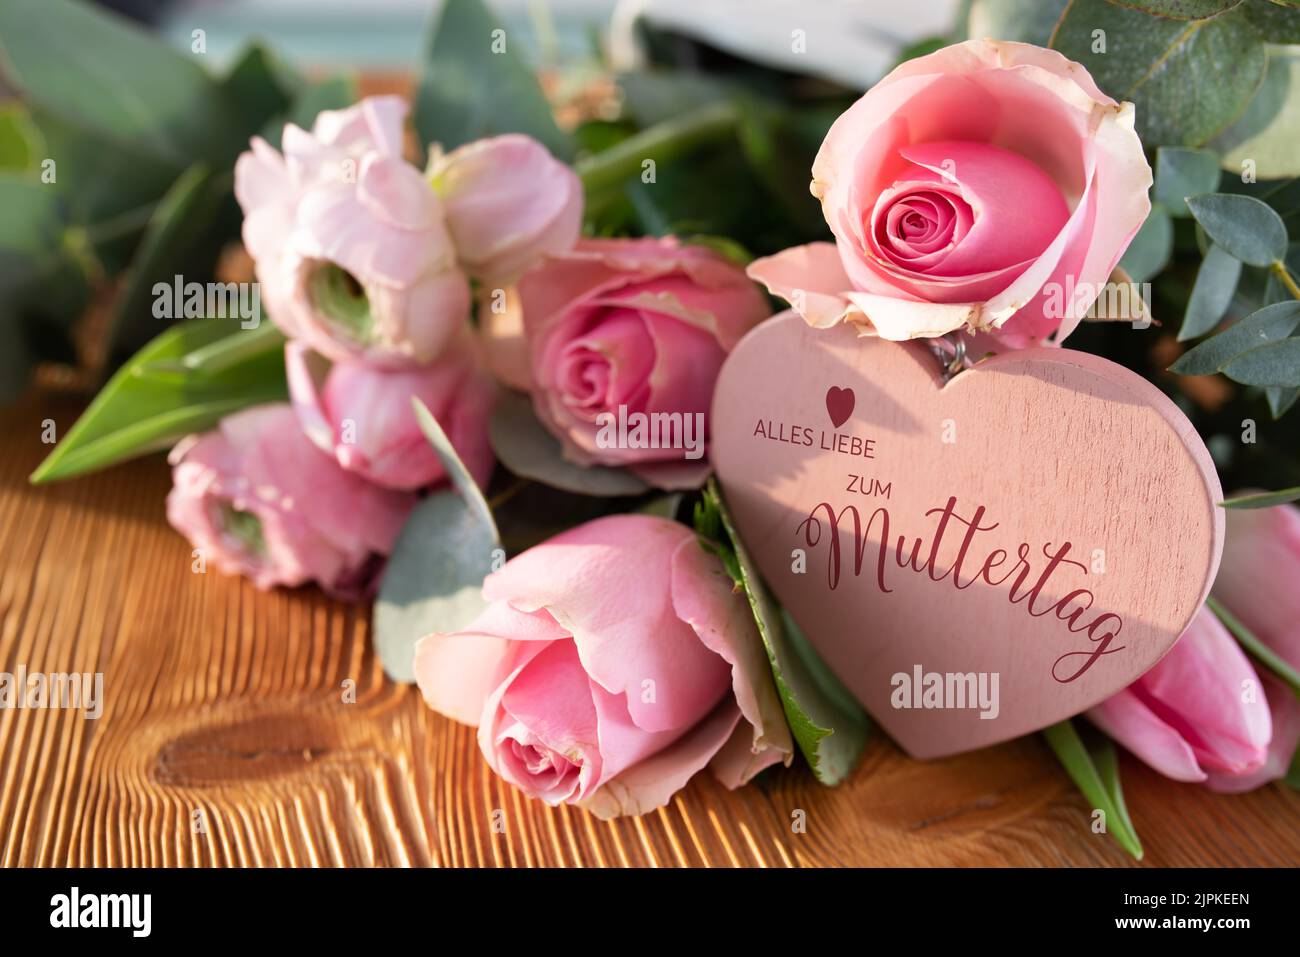 mothers day, alles liebe zum muttertag, mothers days Stock Photo